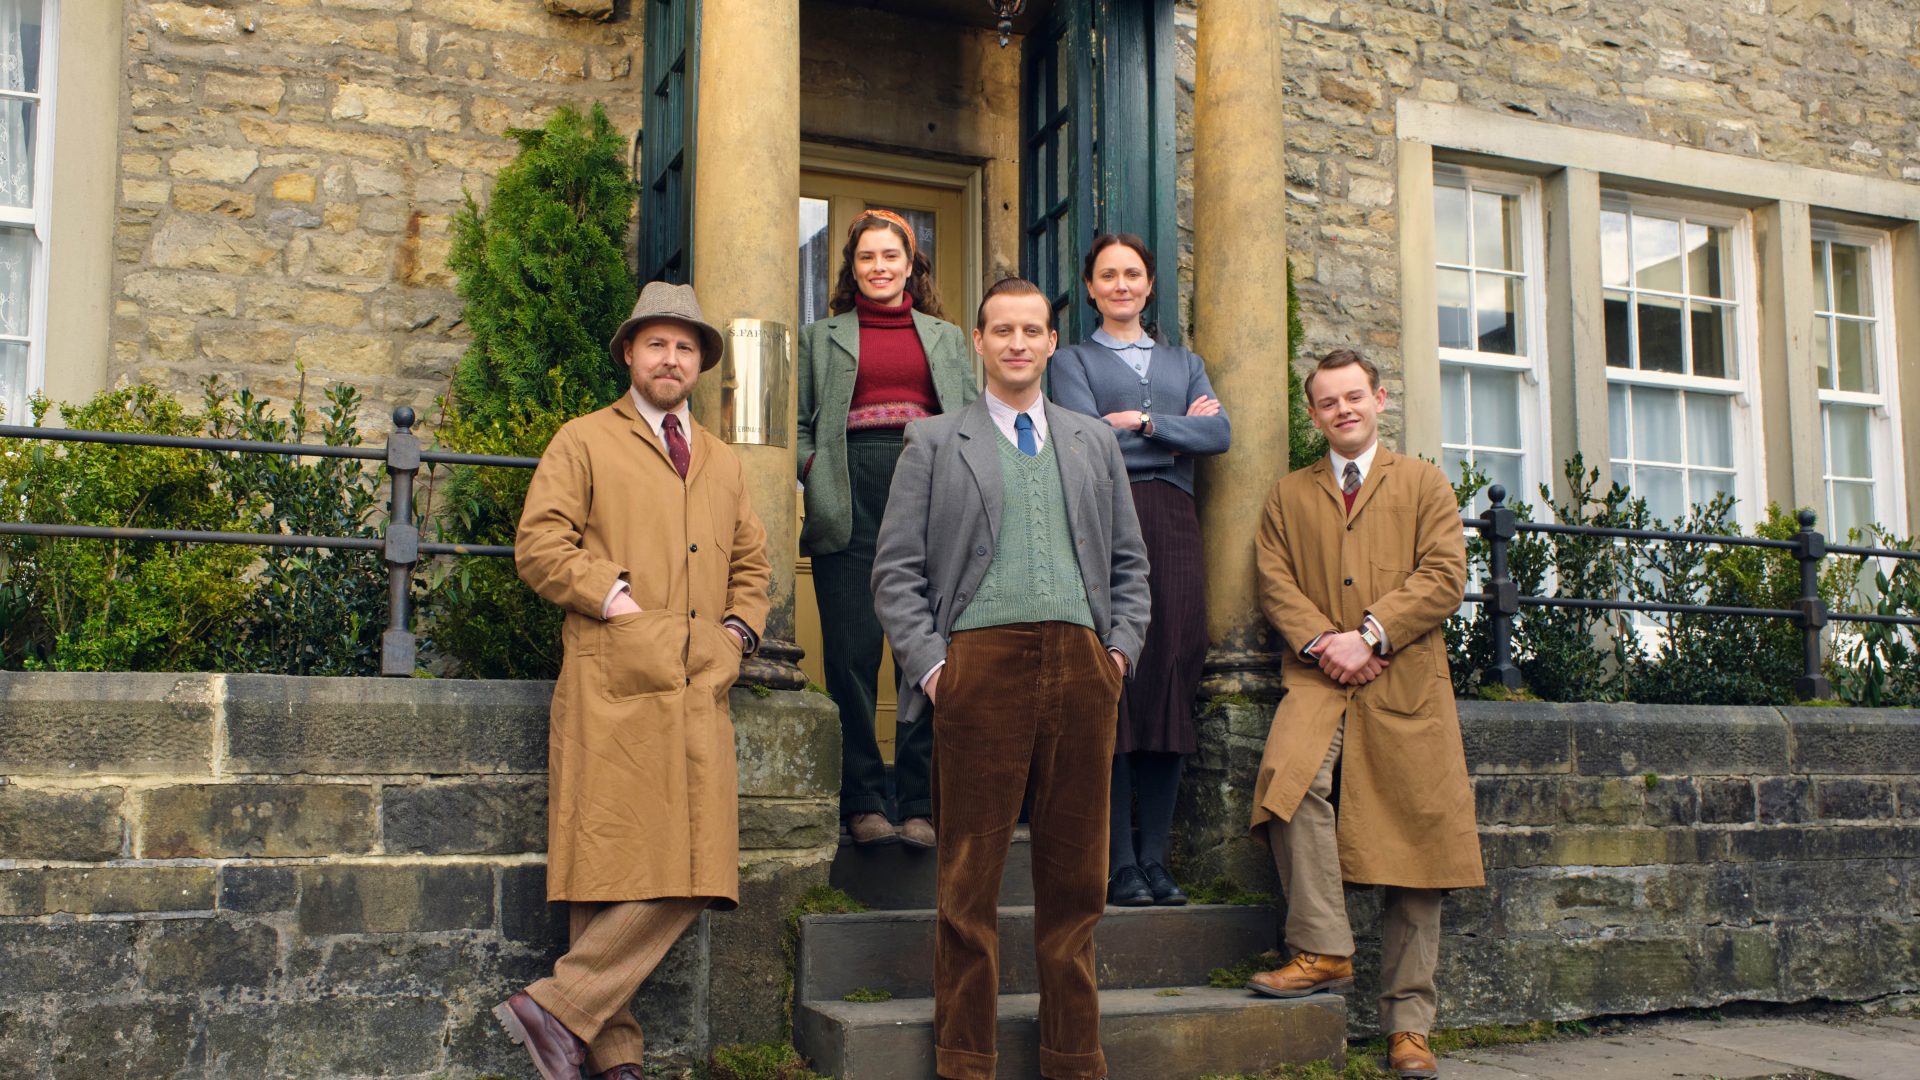 MASTERPIECE 
“All Creatures Great and Small” Season 2

Coming Soon to MASTERPIECE on PBS

Shown: FRONT LEFT TO RIGHT, SIEGFREID FARNON (SAMUEL WEST), JAMES HERRIOT (NICHOLAS RALPH) & TRISTAN FARNON (CALLUM WOODHOUSE).
BACKROW: HELEN ALDERSON (RACHEL SHENTON) & MRS HALL (ANNA MADELEY).

For editorial use only.

Courtesy of MASTERPIECE.